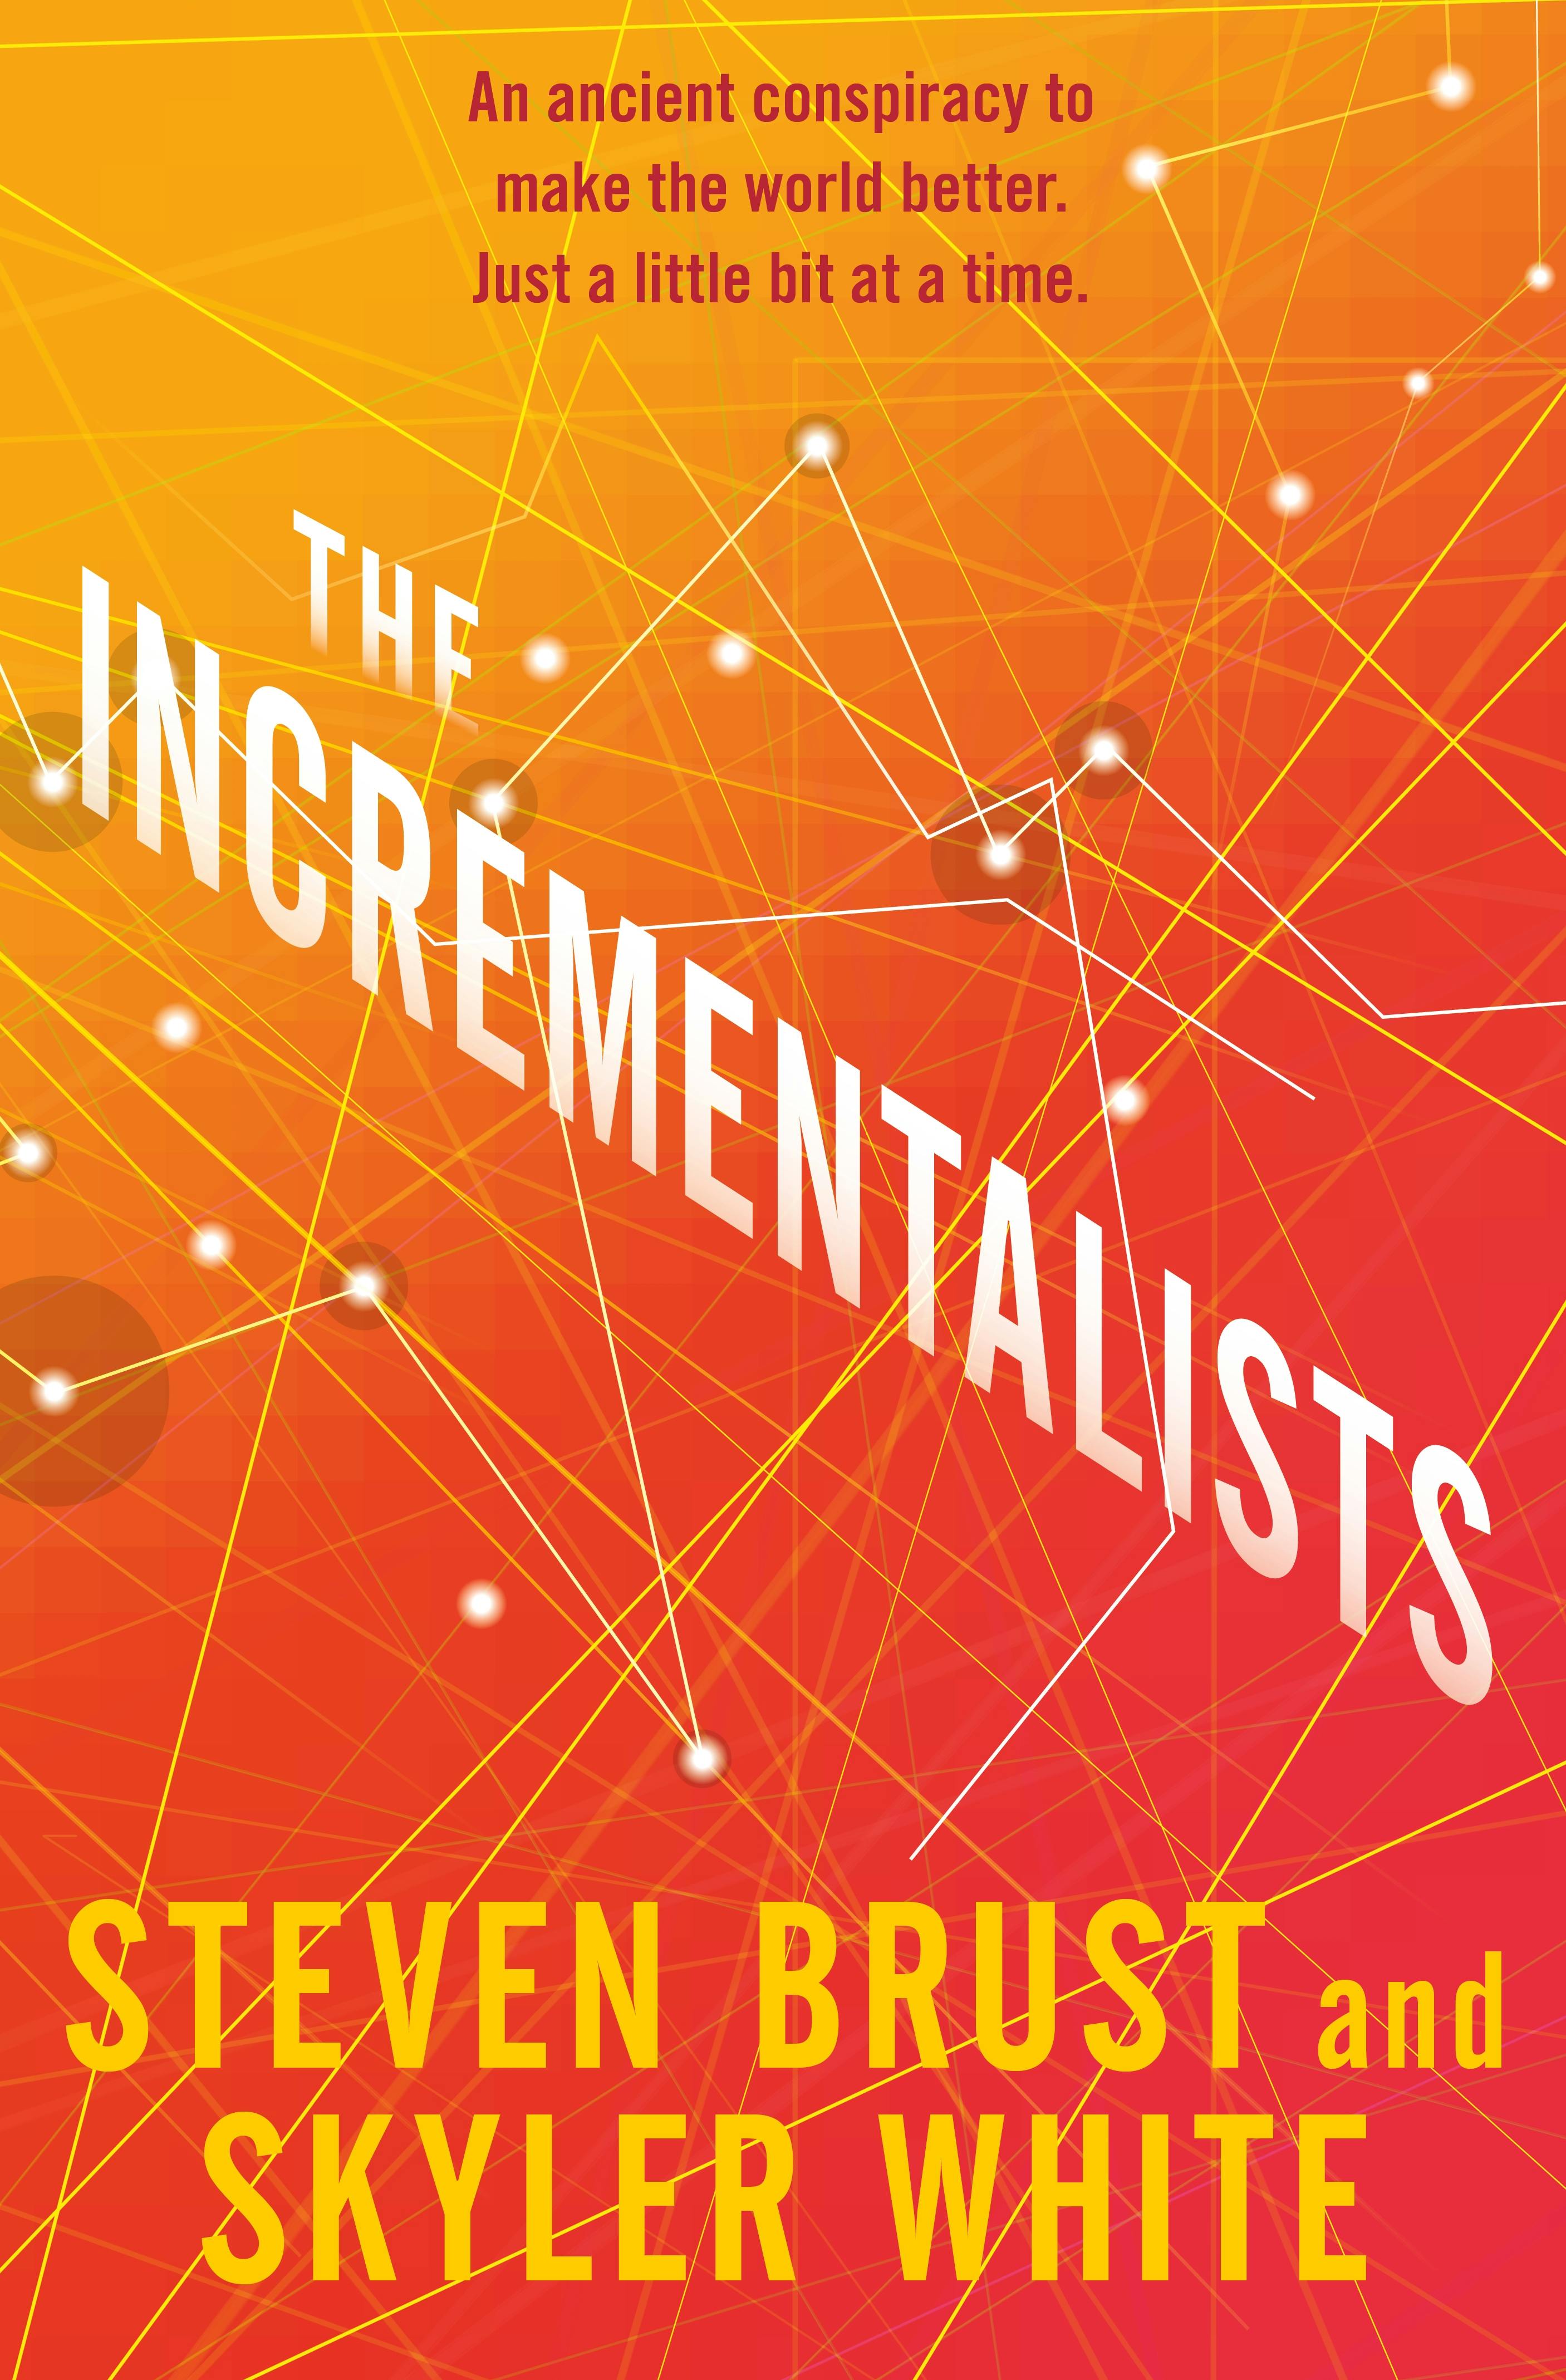 Image of The Incrementalists